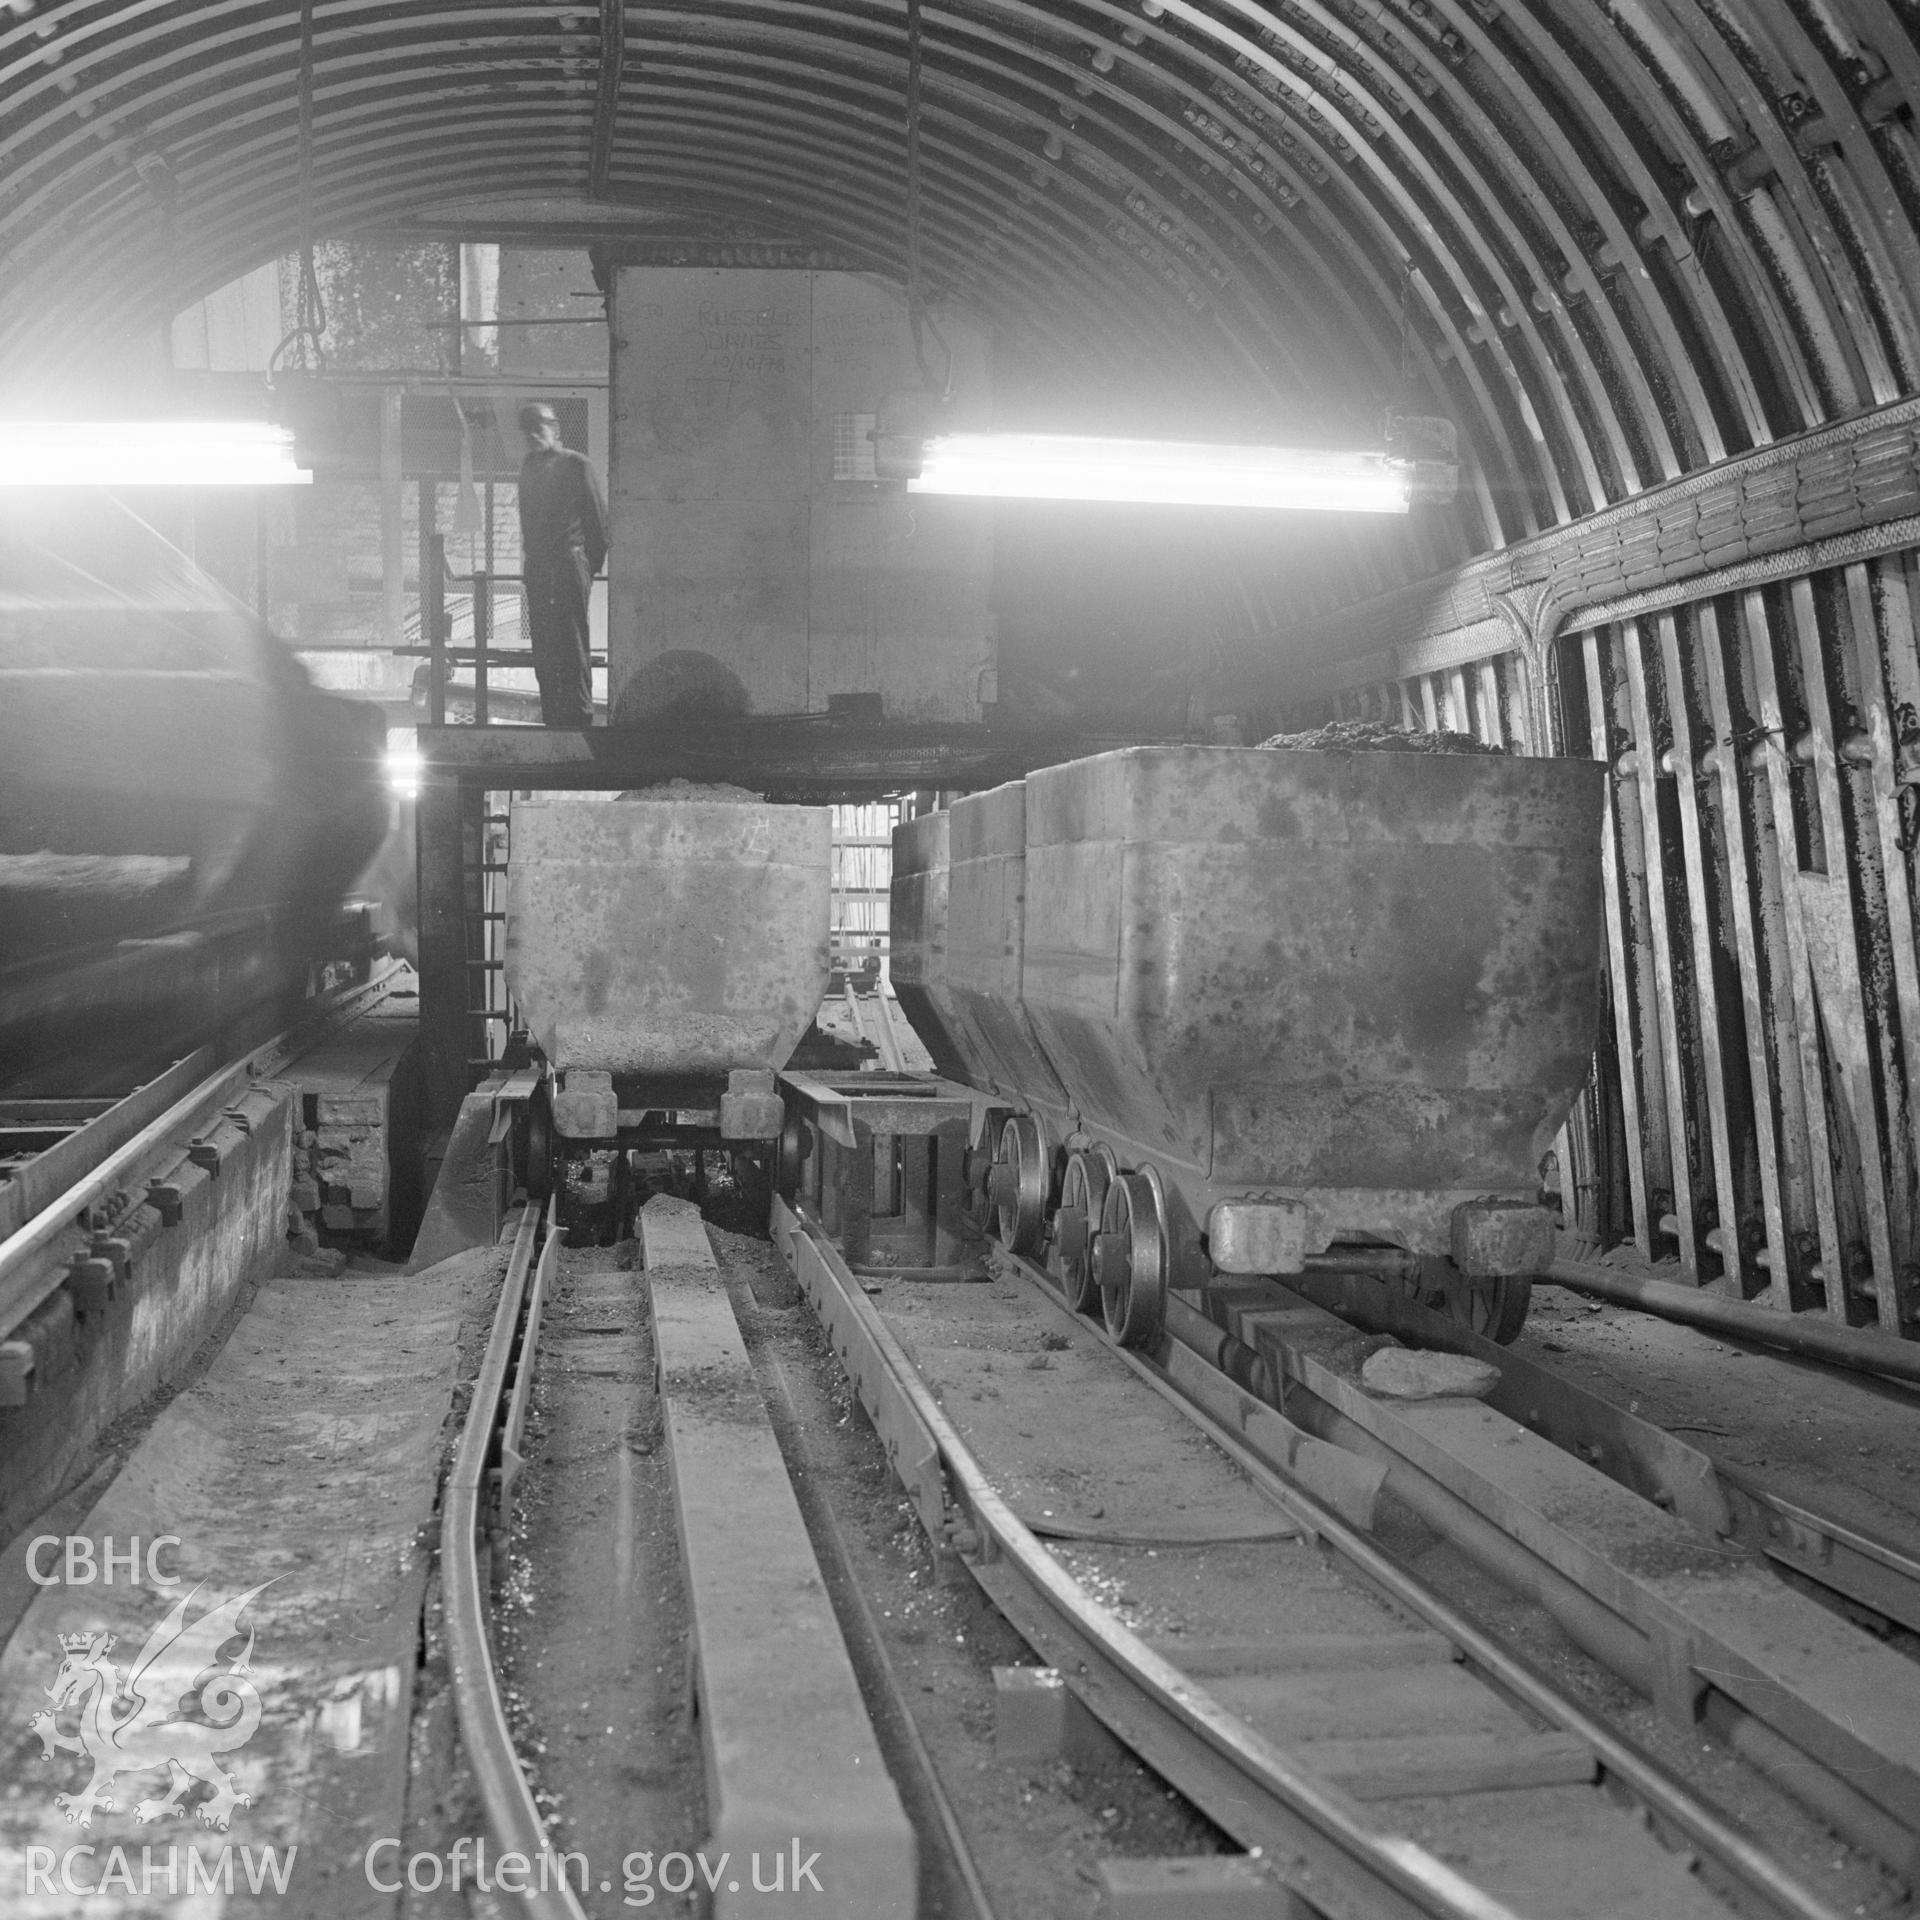 Digital copy of an acetate negative showing coal trams at Taff Colliery, from the John Cornwell Collection.